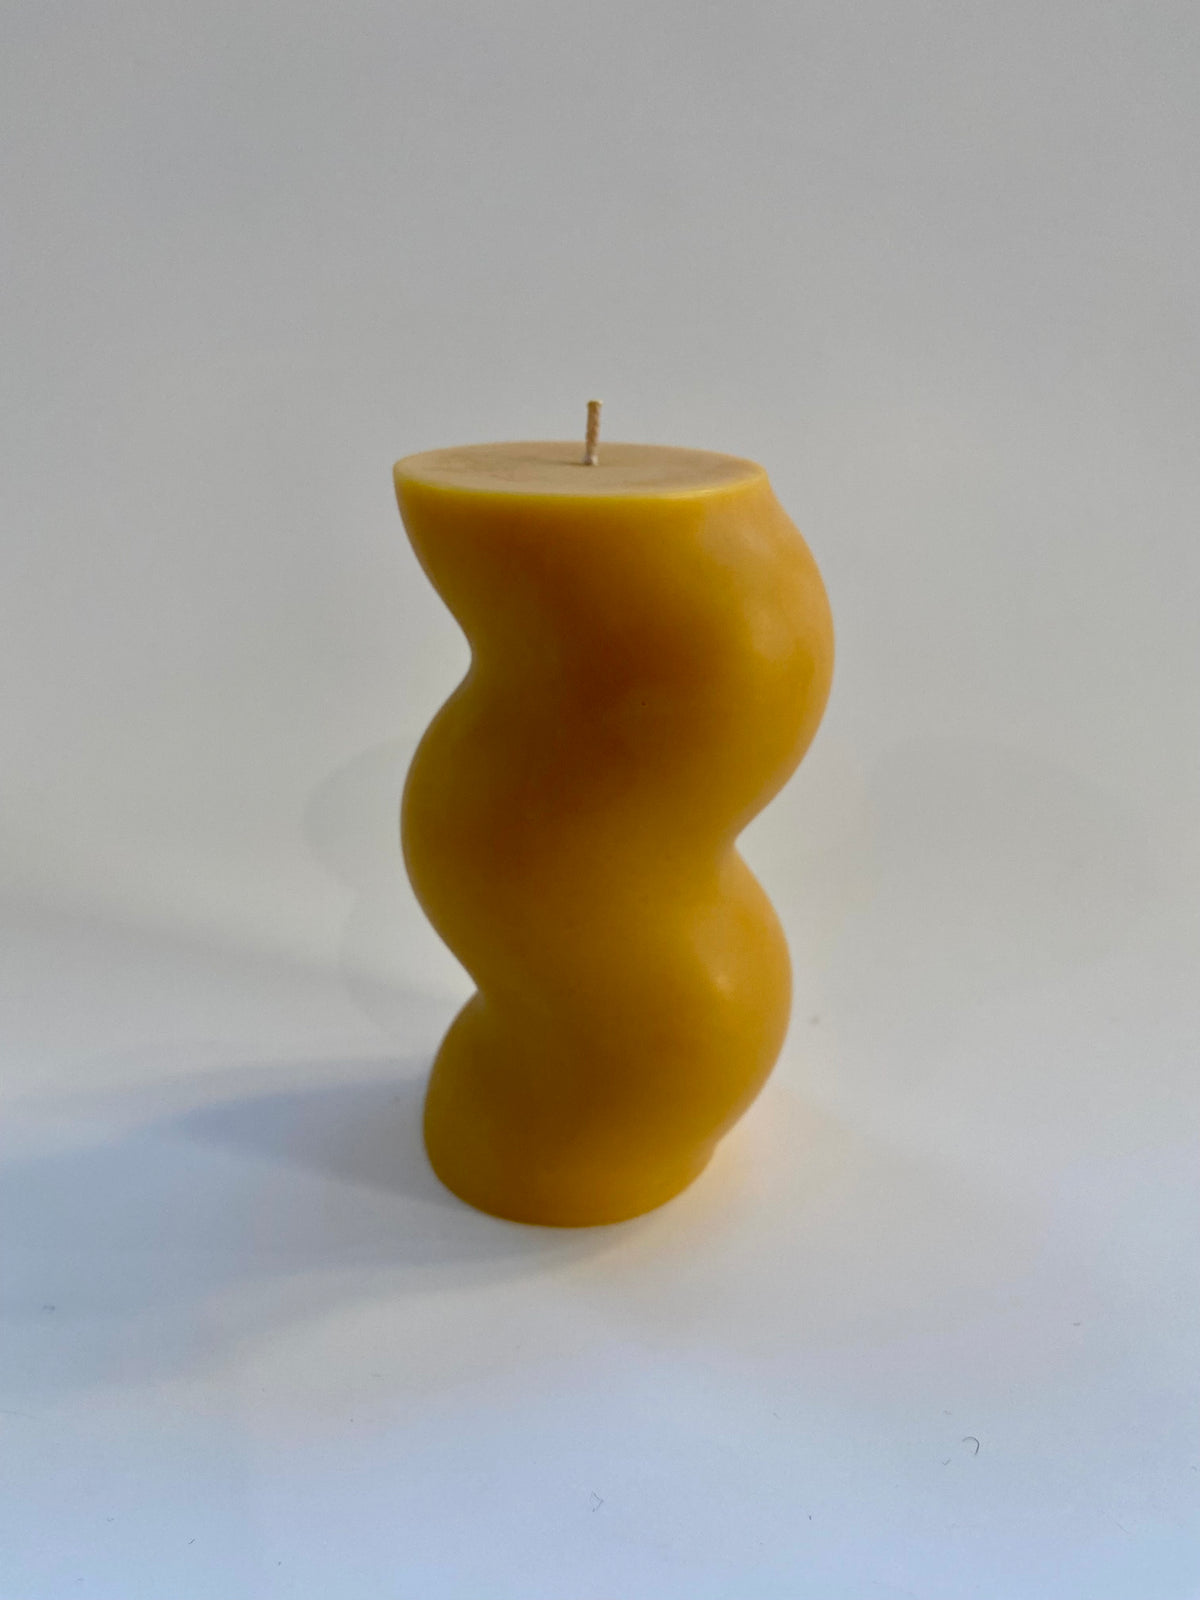 CANDLE-SQUIGGLY - William Bee